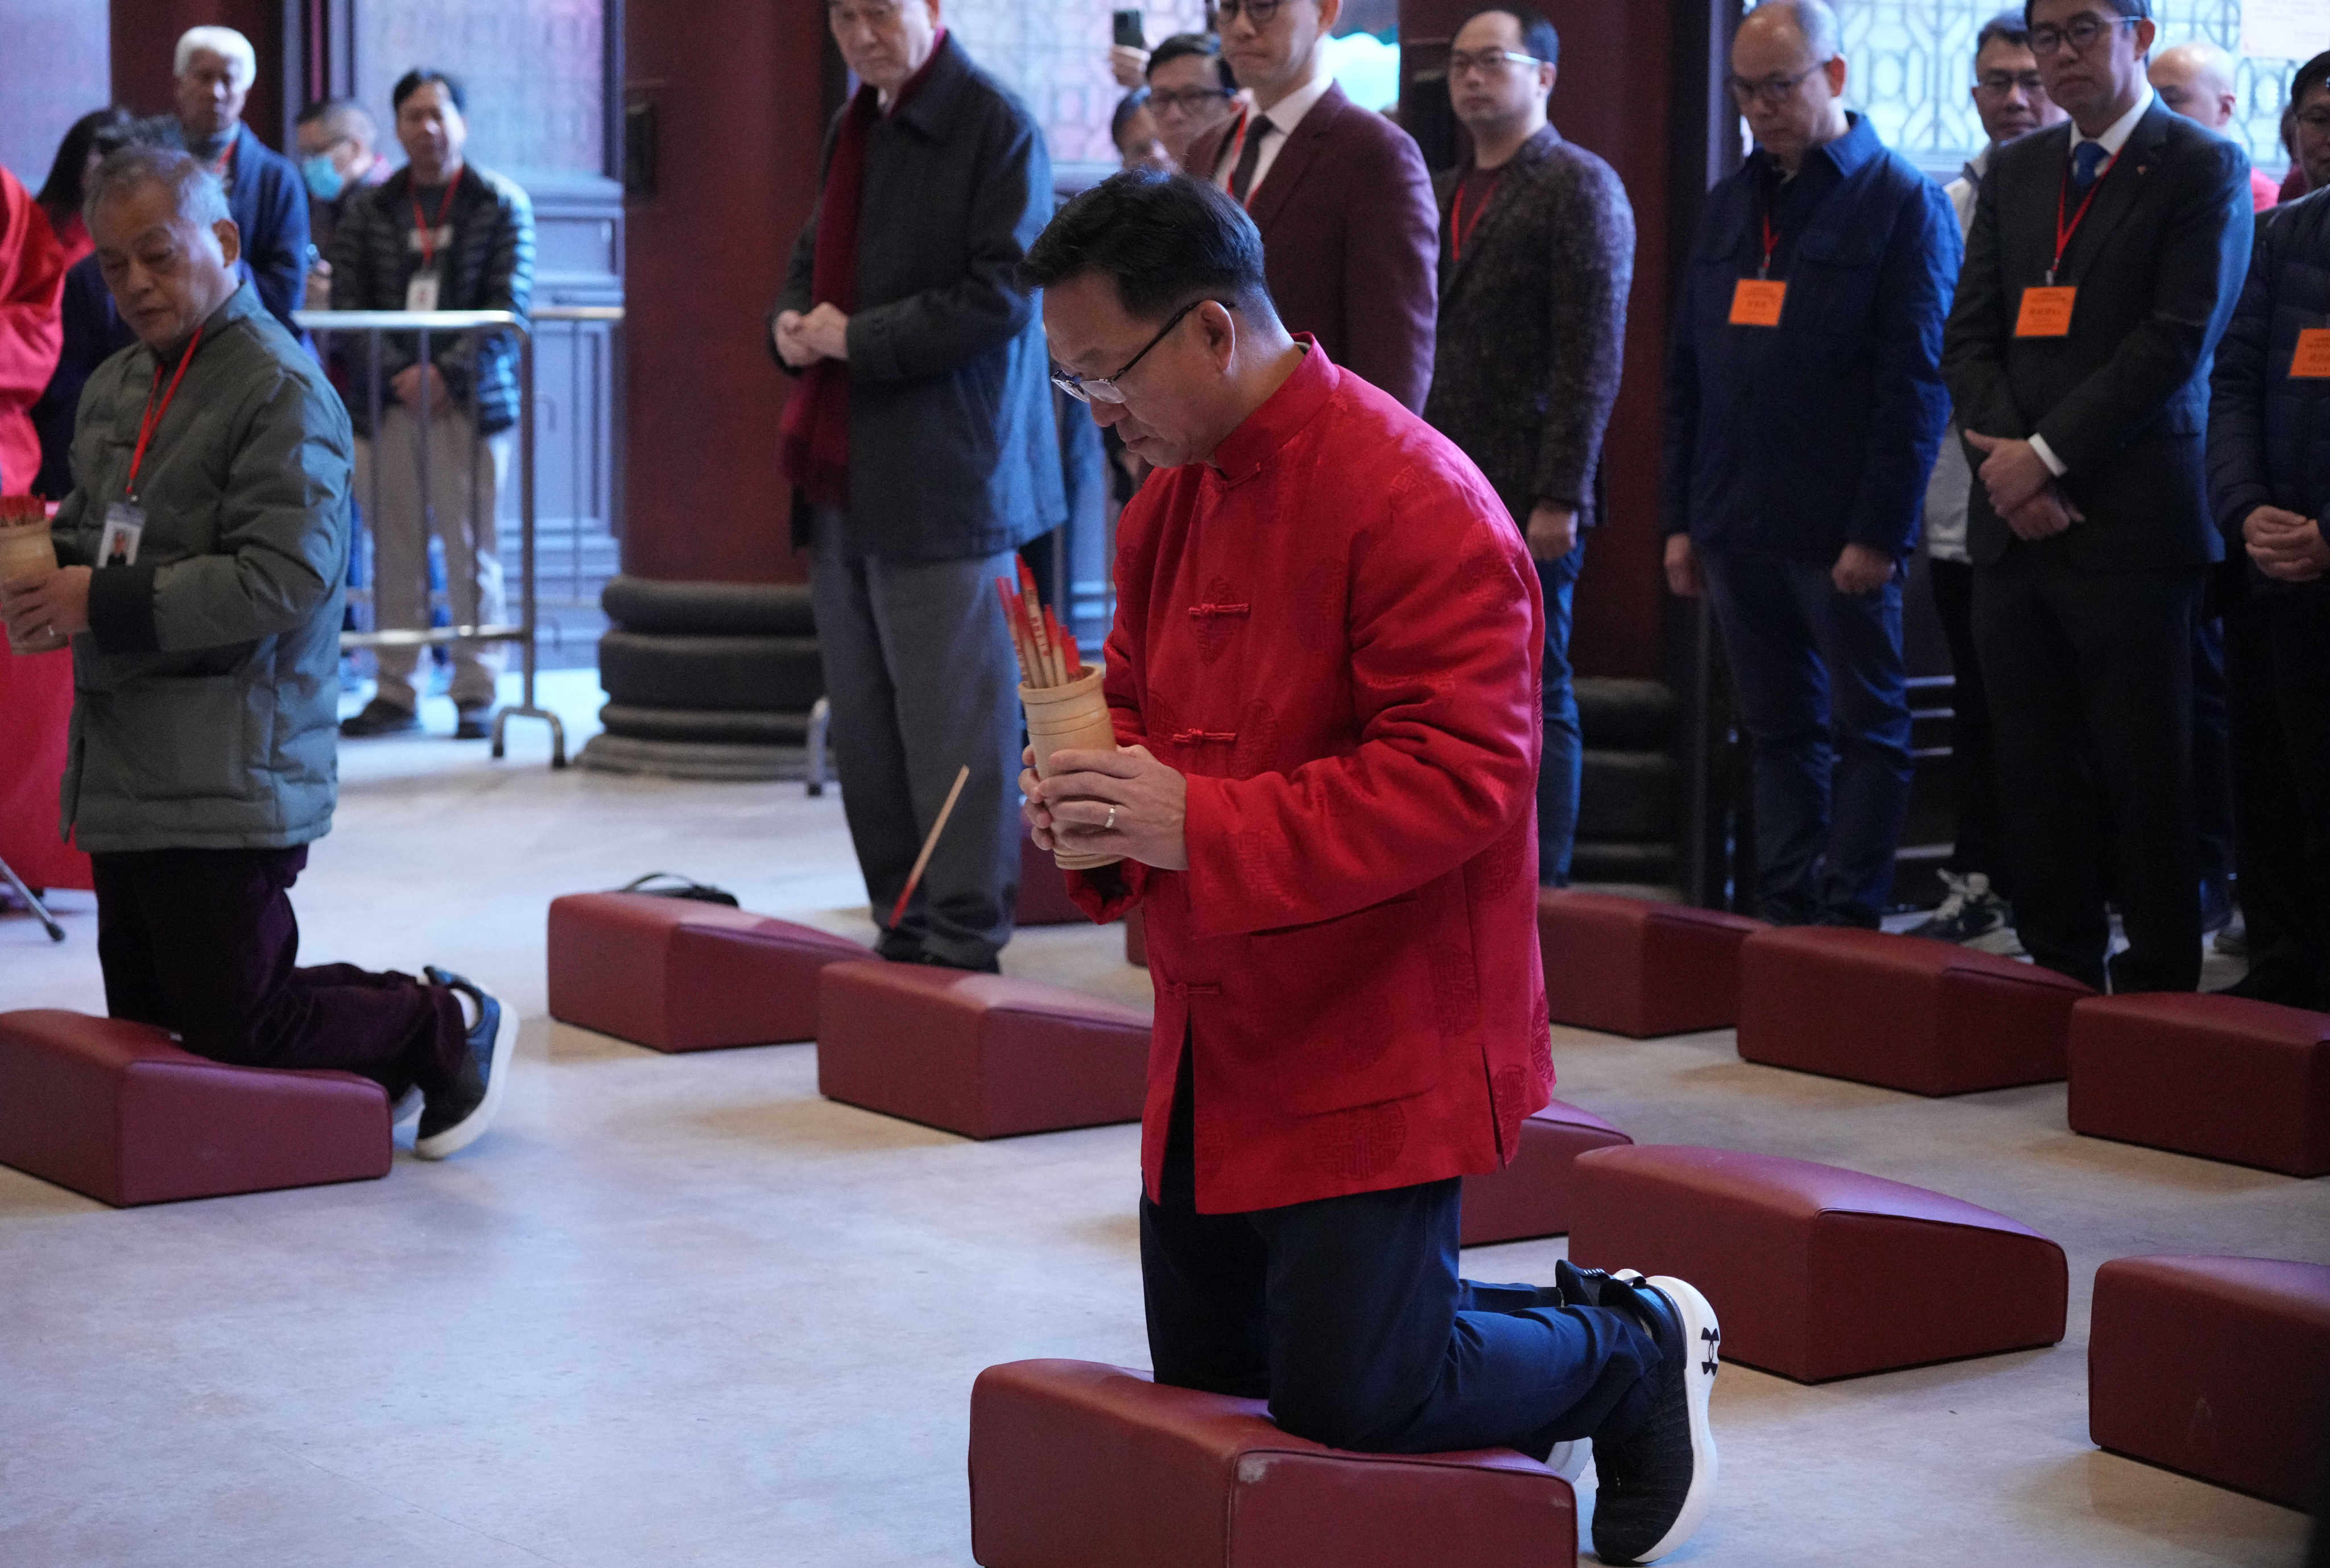 Kenneth Lau Ip-keung, chairman of the Heung Yee Kuk, takes part in fortune-stick-drawing ritual at Che Kung Temple in Sha Tin, on the second day of Lunar New Year, on February 11. Photo: Eugene Lee